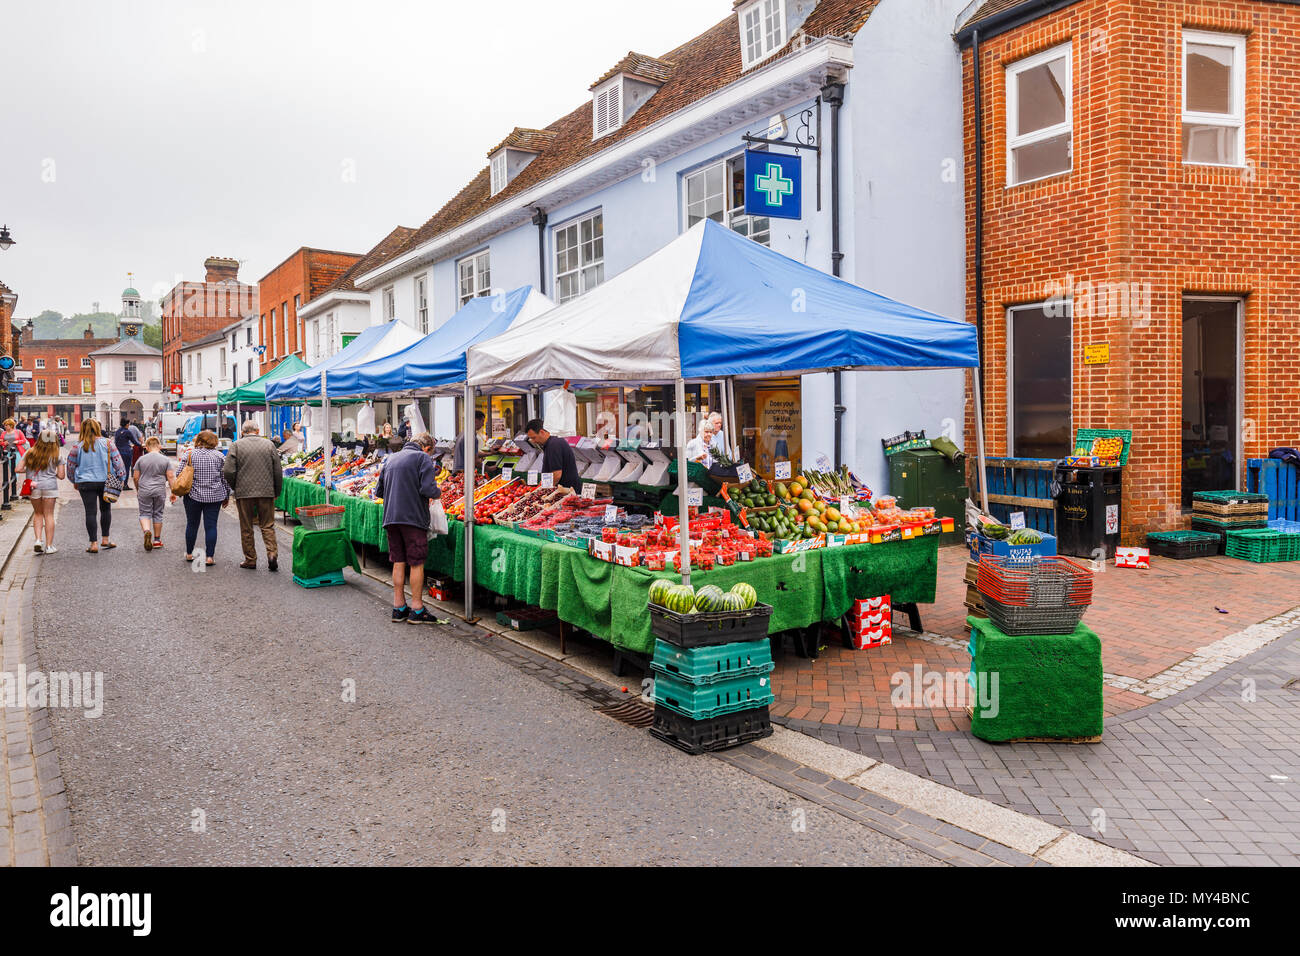 Fruit & vegetable stall in the weekend traditional farmers market in Godalming, a small historic market town near Guildford, Surrey, southeast England Stock Photo